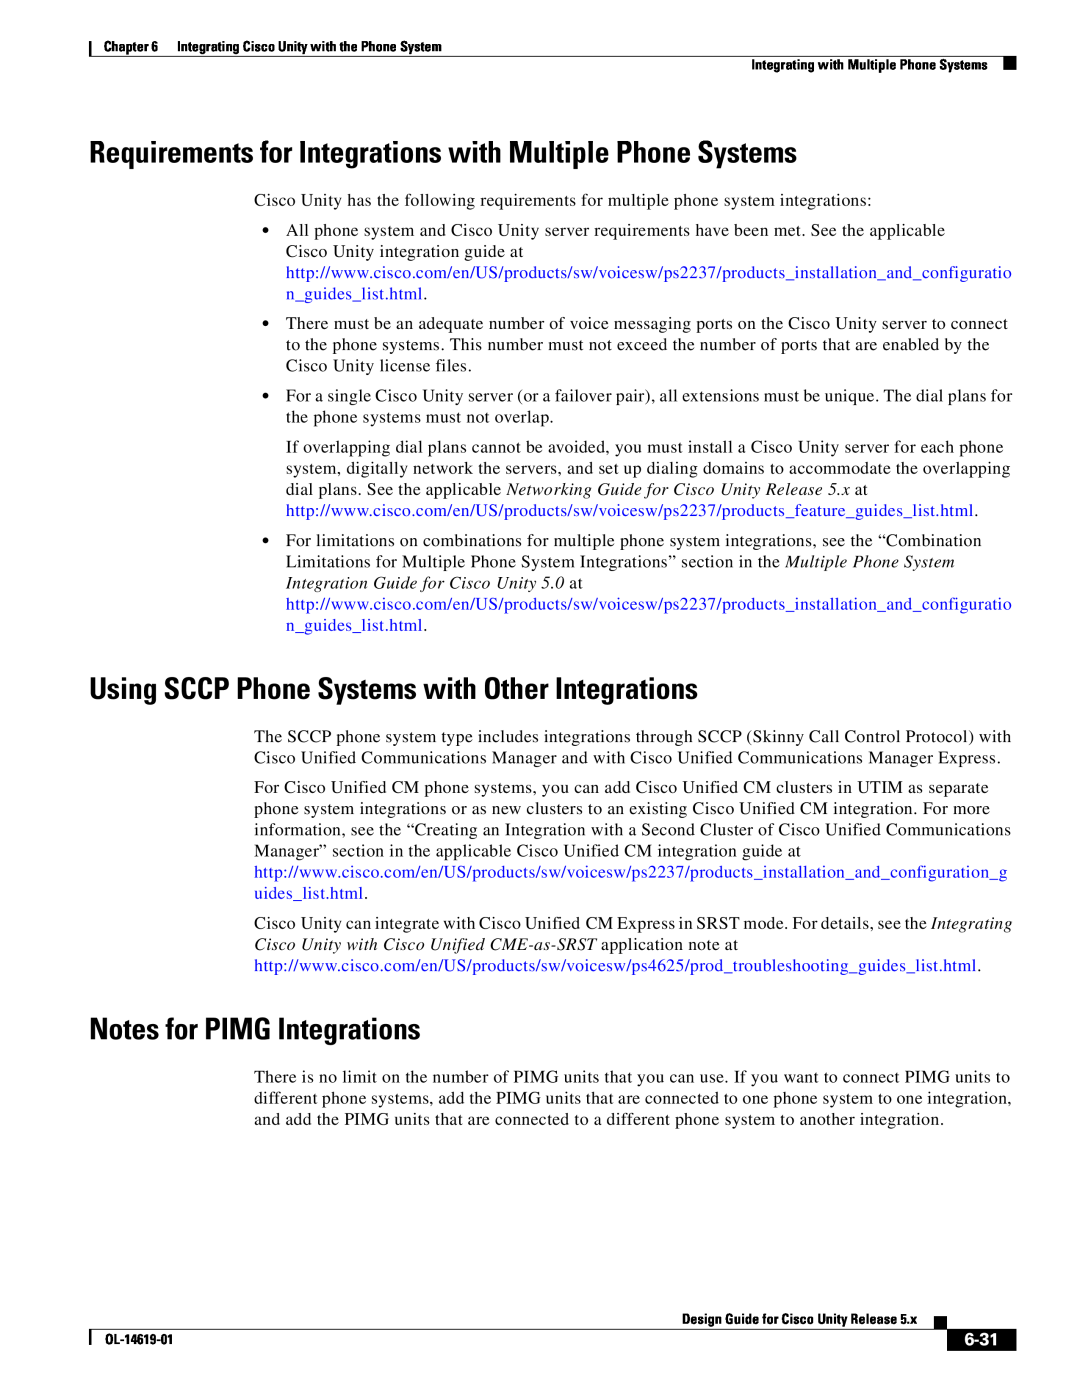 Cisco Systems OL-14619-01 Requirements for Integrations with Multiple Phone Systems, Notes for PIMG Integrations, 6-31 